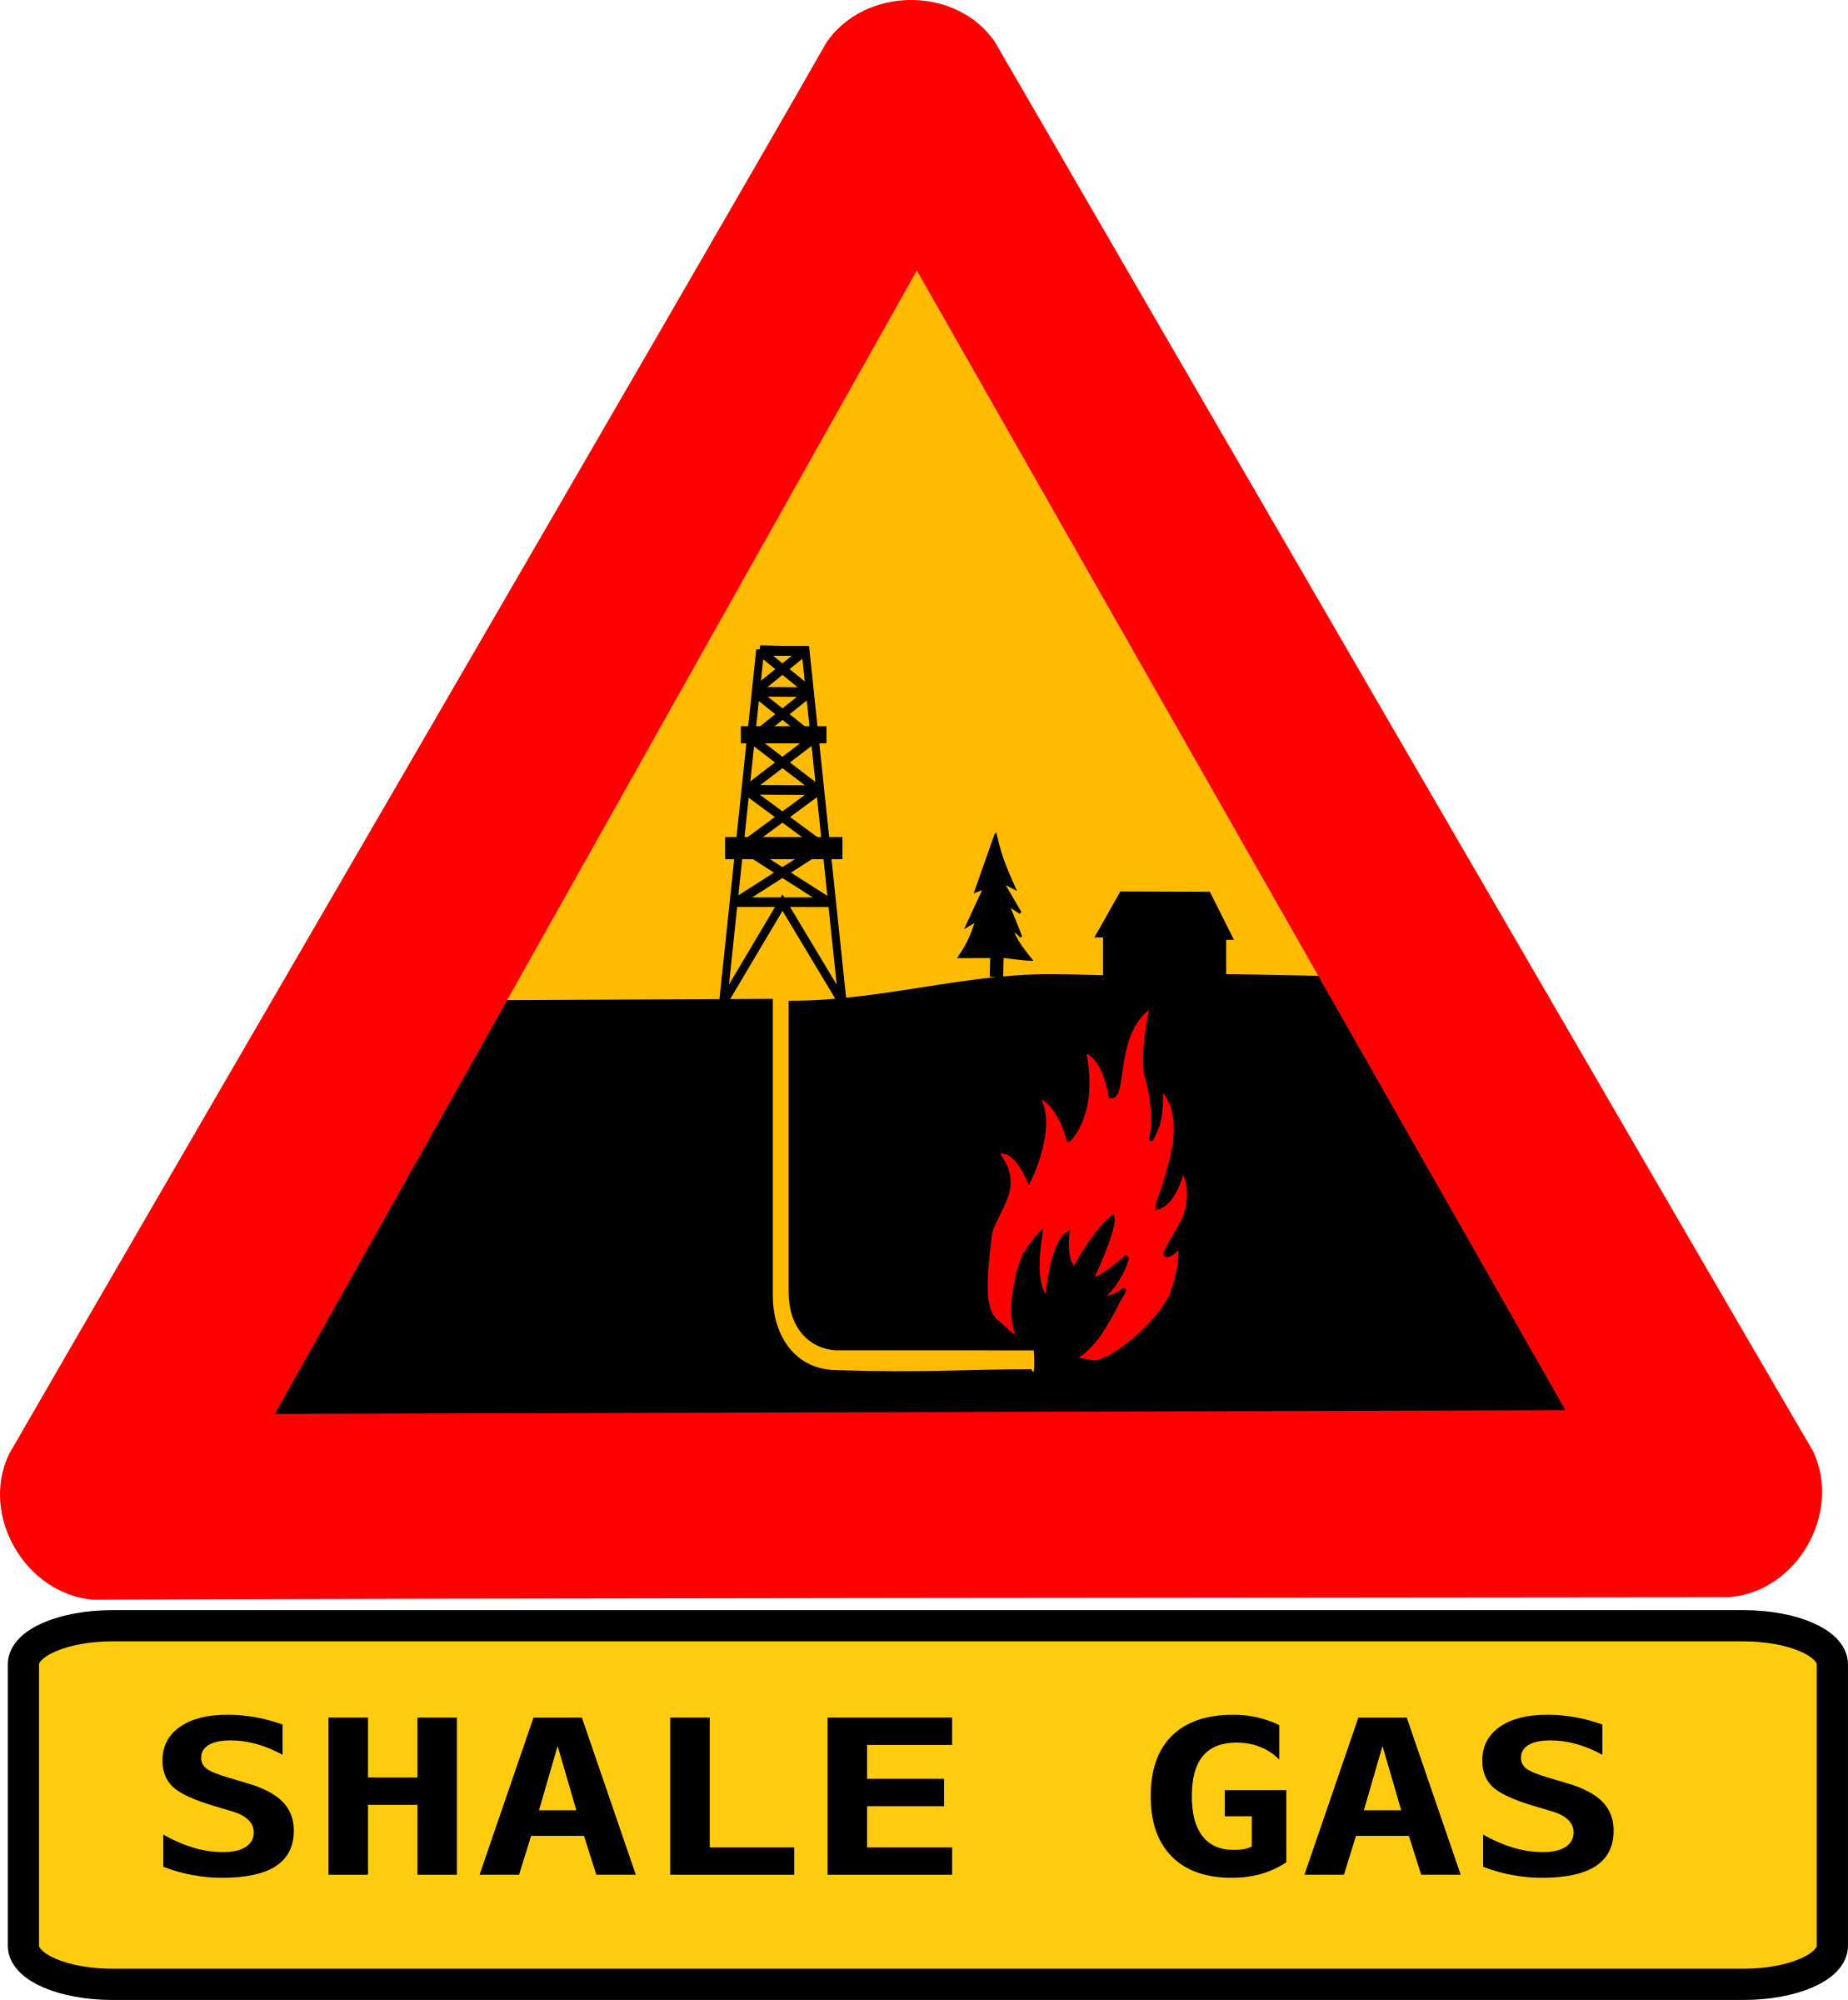 Warning shale gas with text Clip arts